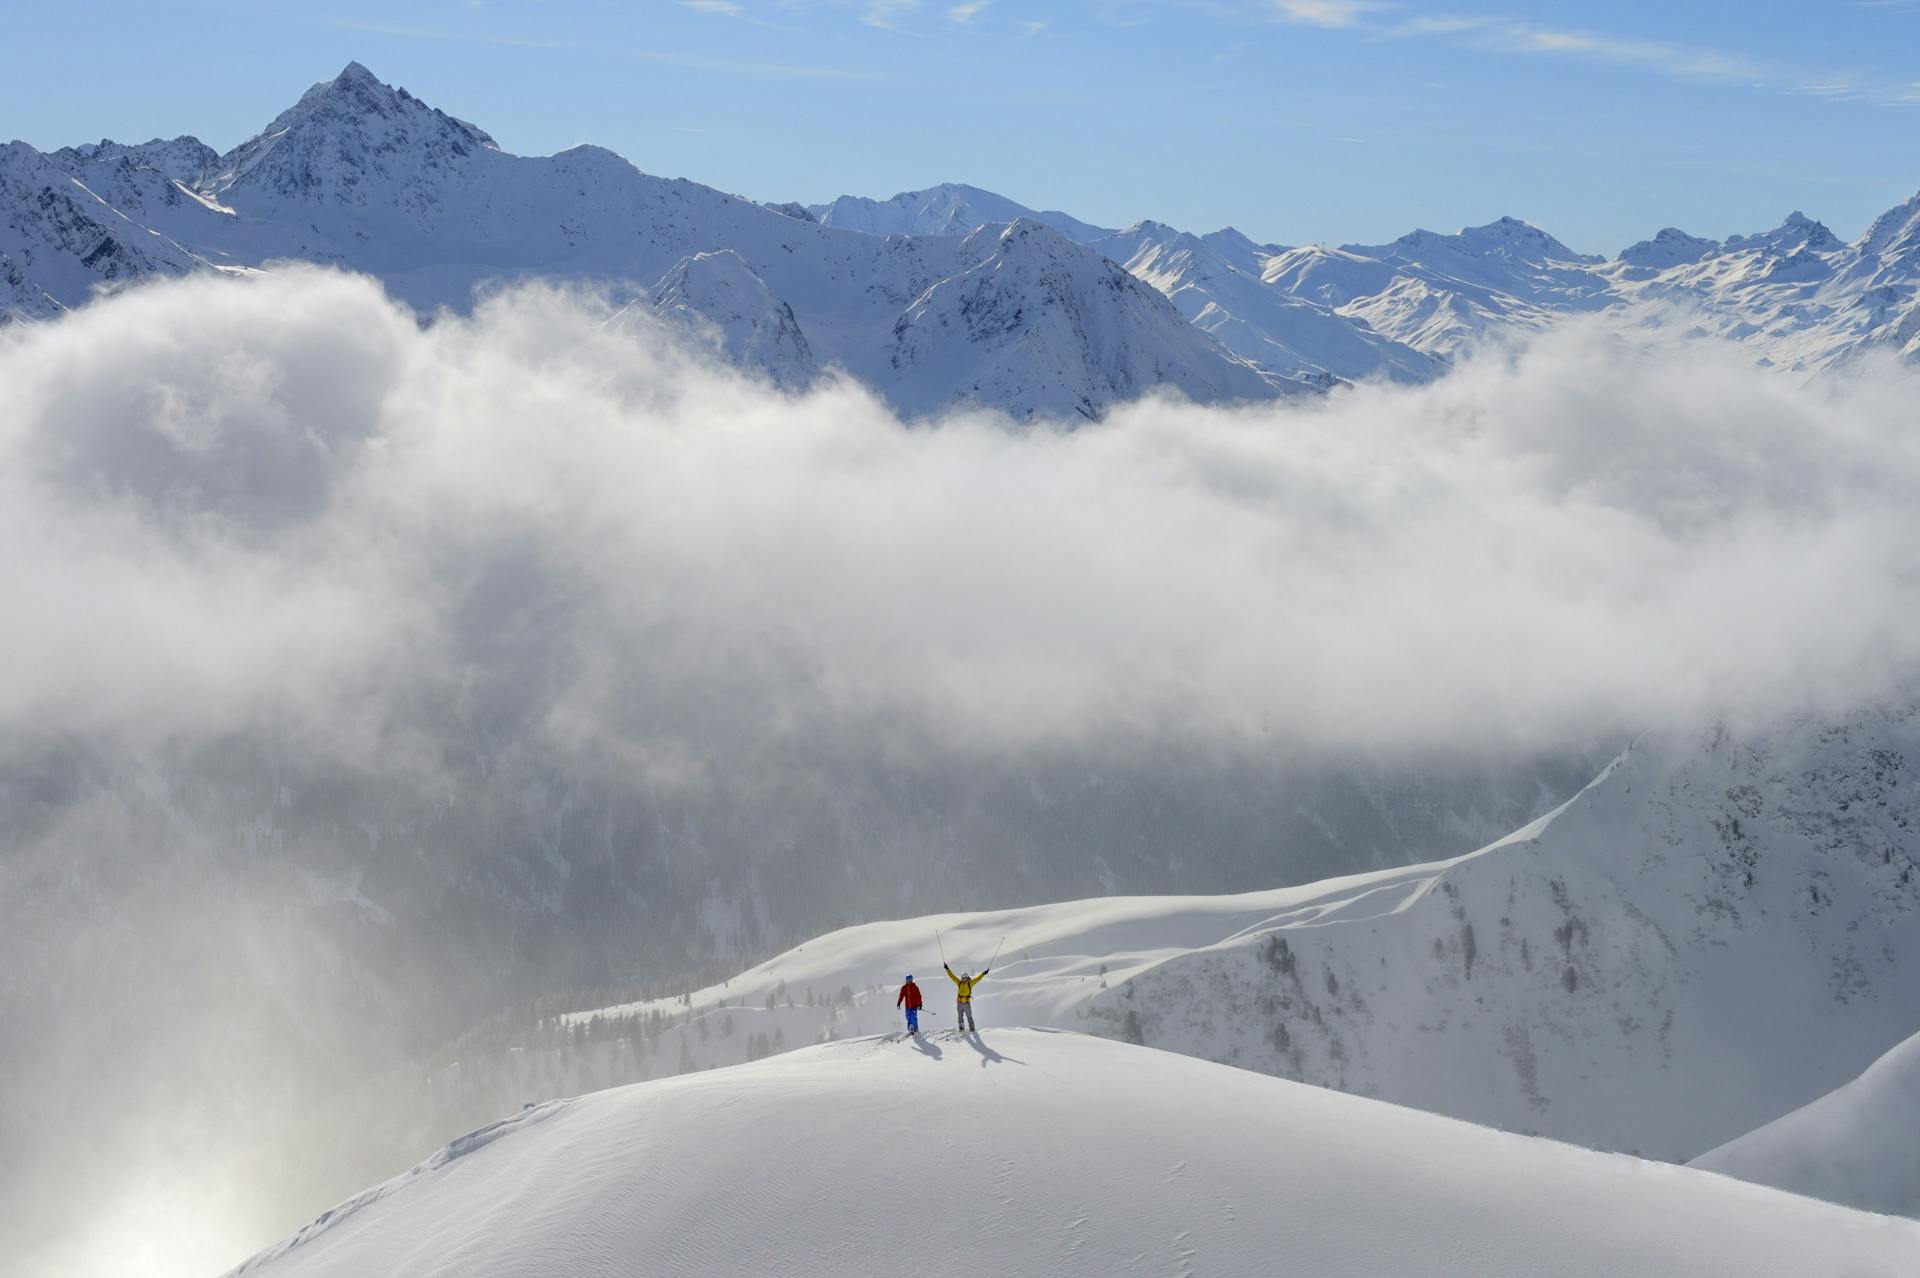 2 skiiers at peak of mountain with arms in the air